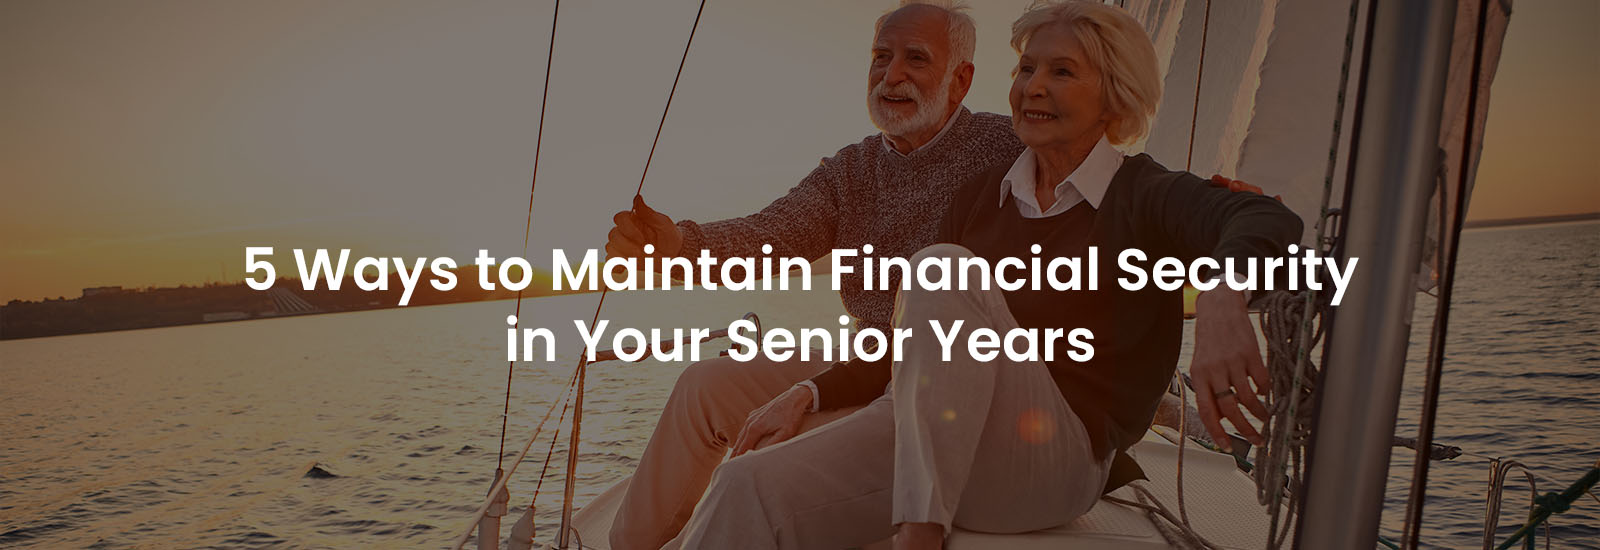 5 Ways to Maintain Financial Security in Your Senior Years | Banner Image